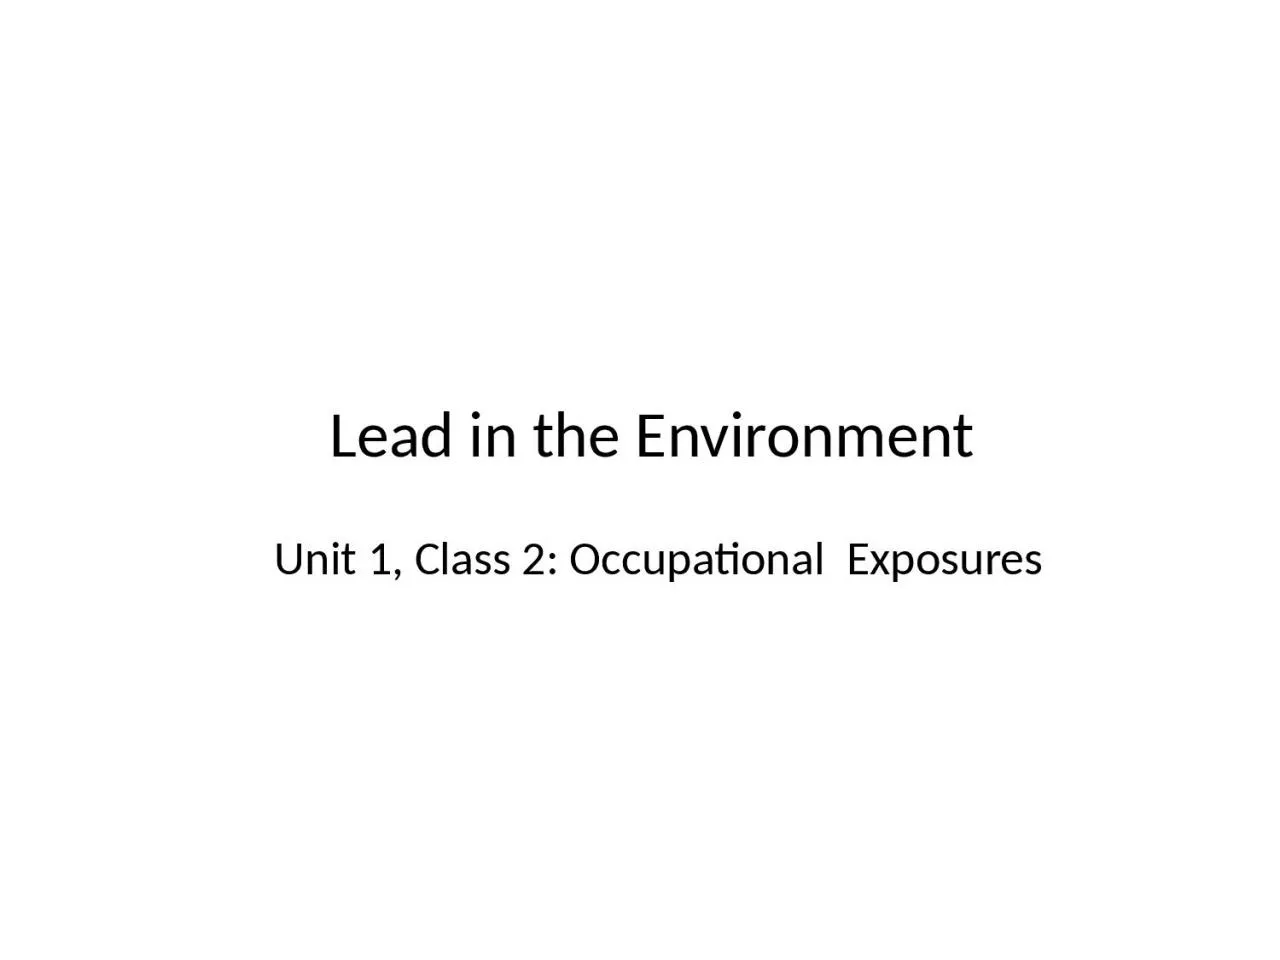 Lead in the Environment